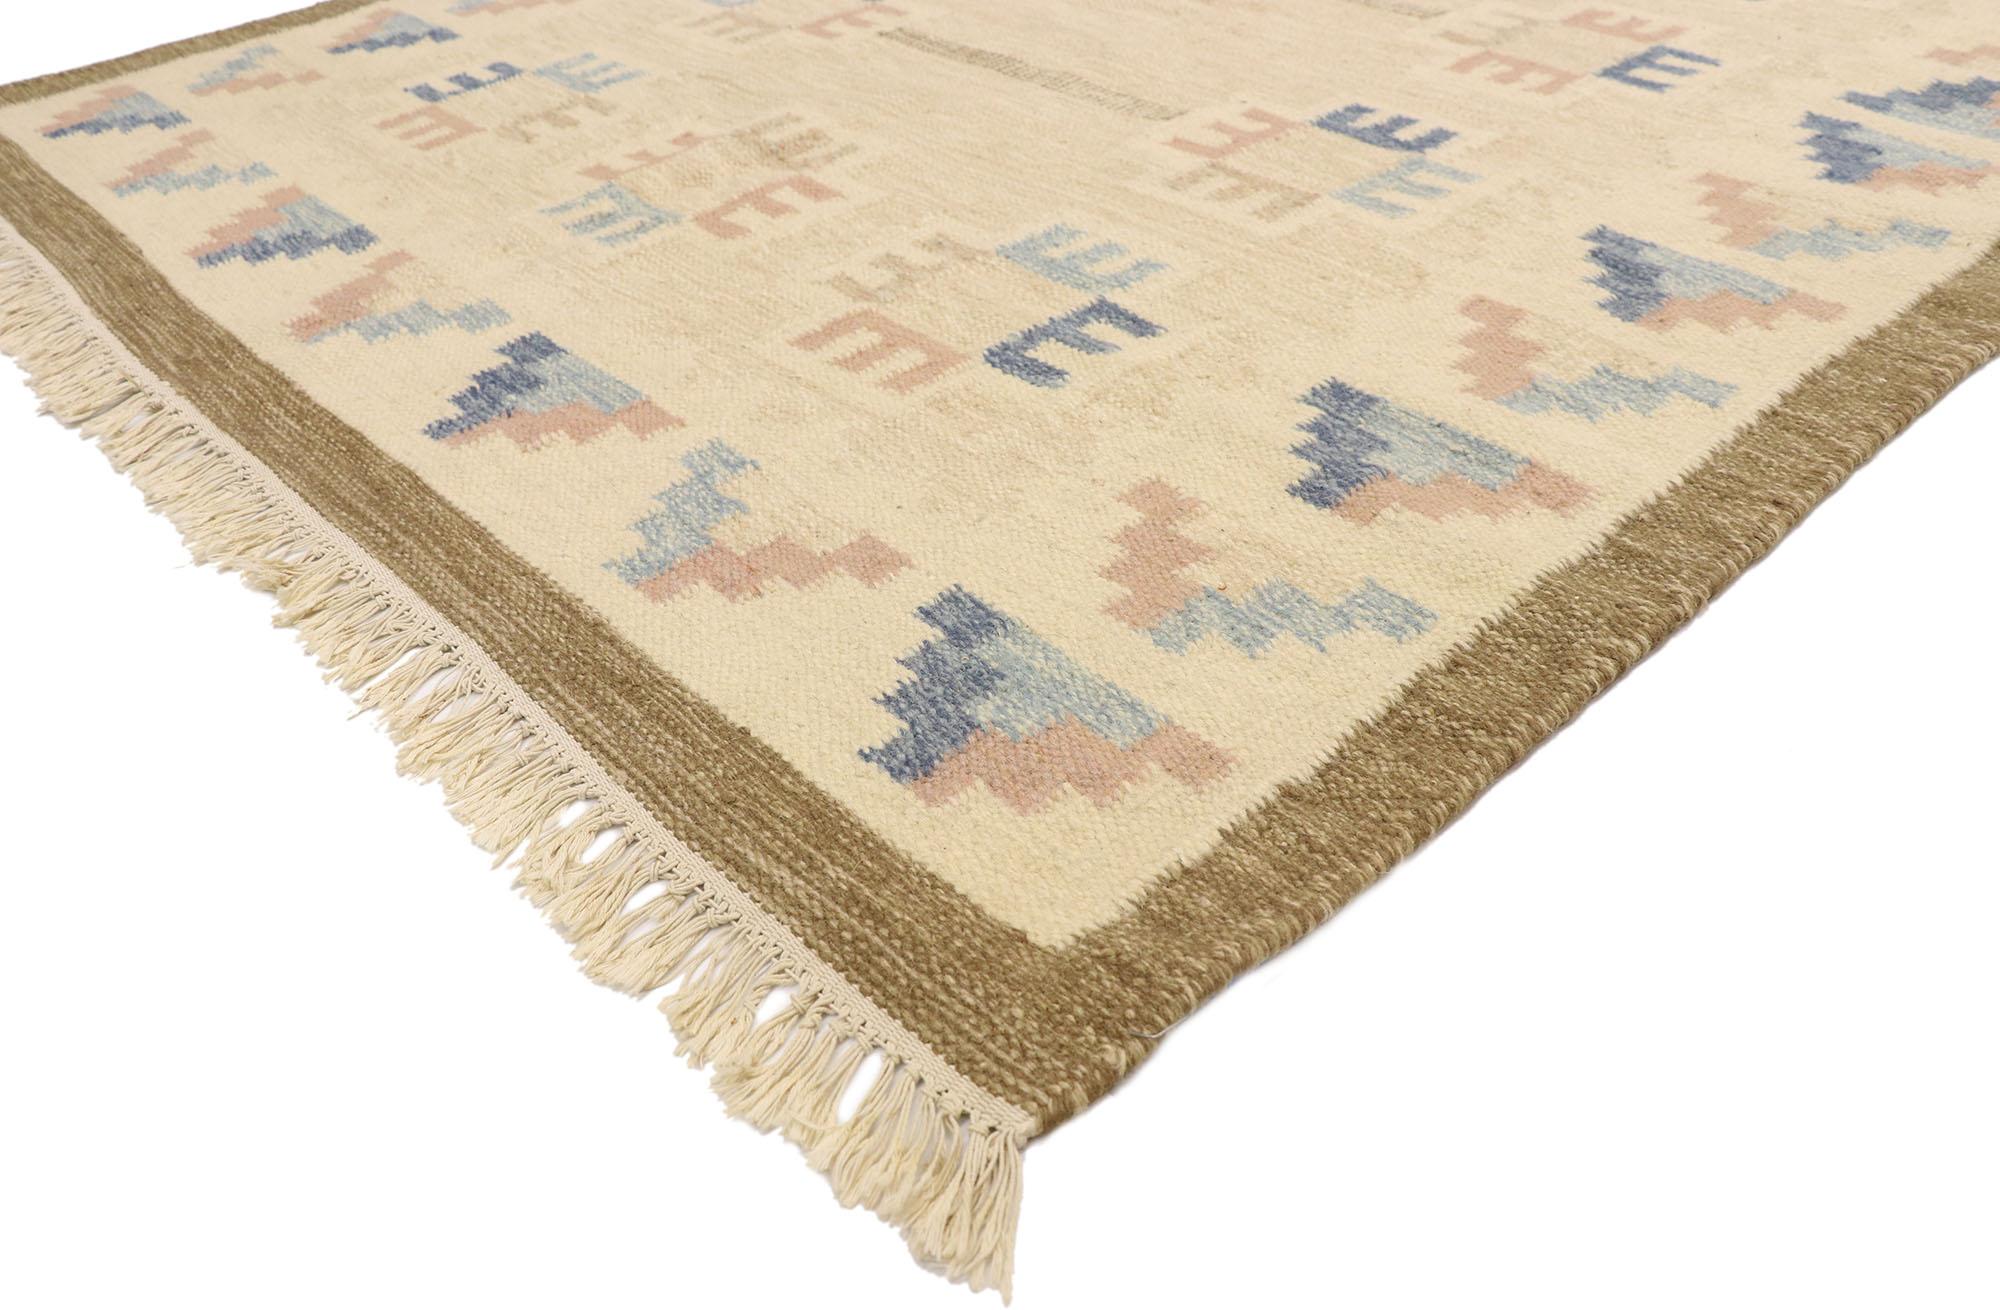 77404, vintage Scandinavian Modern style Swedish Kilim rug, Rollakan rug with boho chic hygge vibes. With its geometric design and Bohemian hygge vibes, this handwoven wool vintage Swedish Kilim rug beautifully embodies the simplicity of